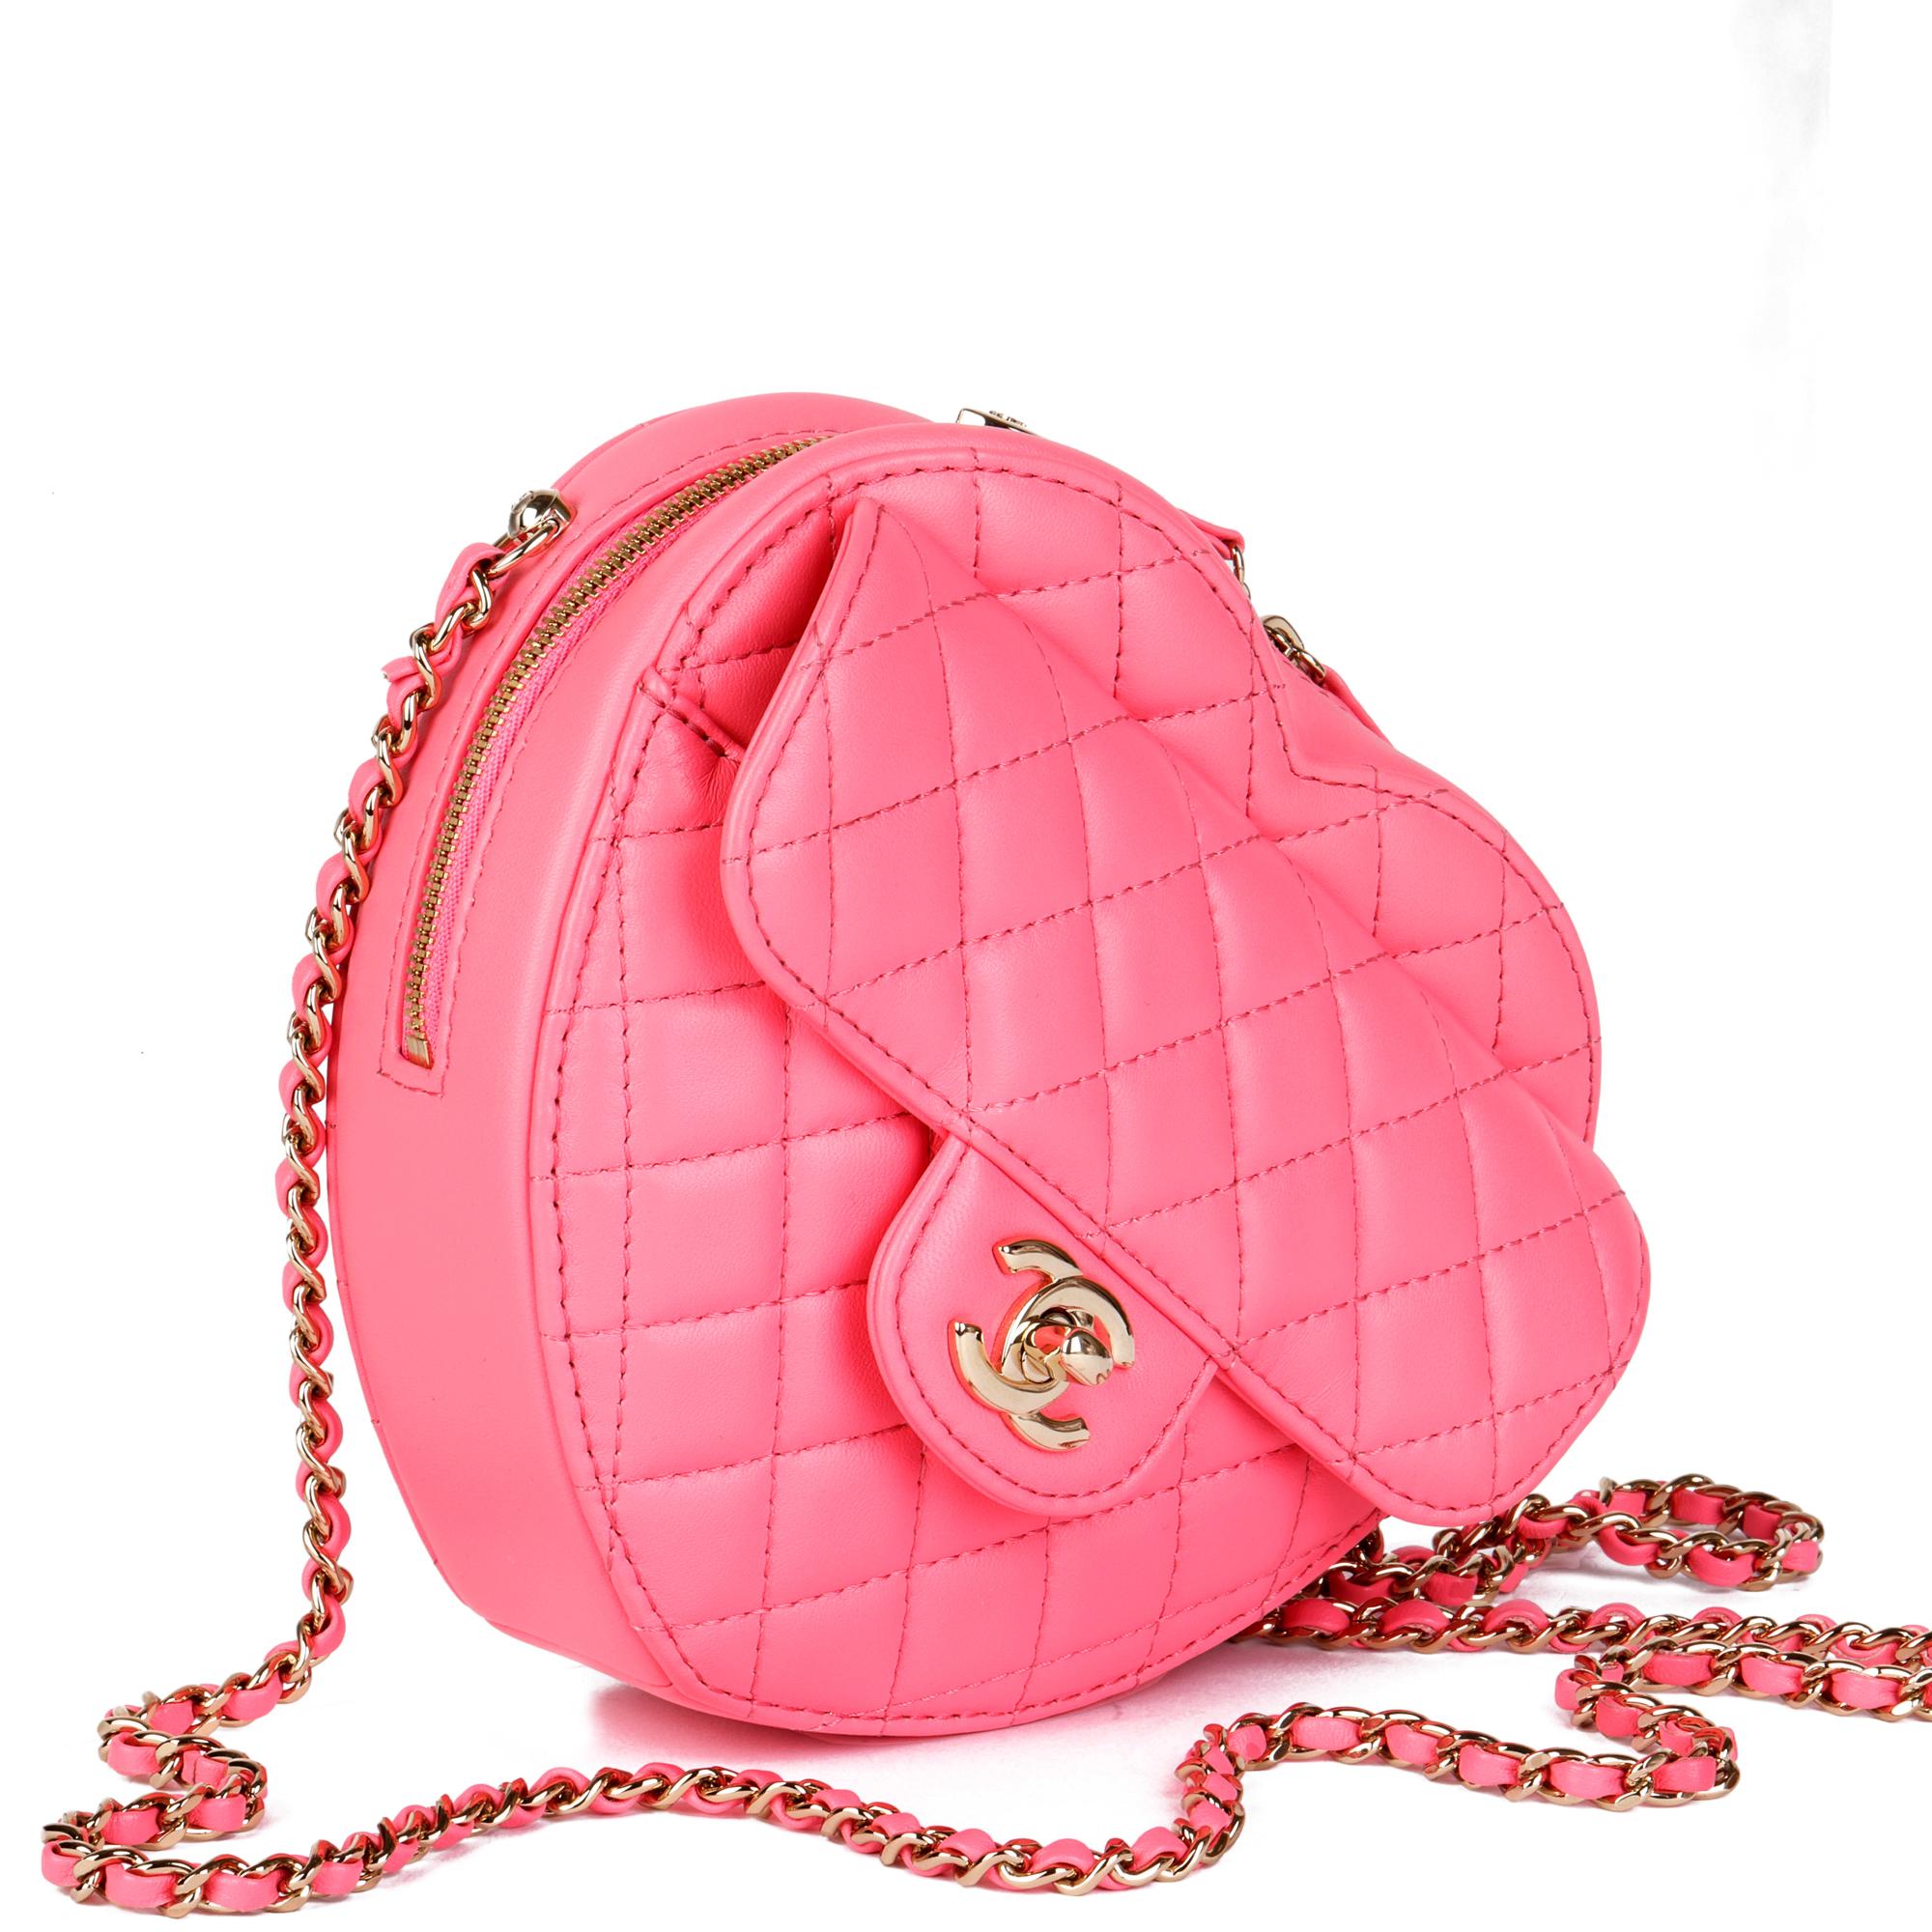 CHANEL
Pink Quilted Lambskin Love Heart Bag

Serial Number: UGU998KC
Age (Circa): 2022
Accompanied By: Chanel Dust Bag, Box, Care Booklet, Protective Felt
Authenticity Details: Microchip (Made in France)
Gender: Ladies
Type: Shoulder,